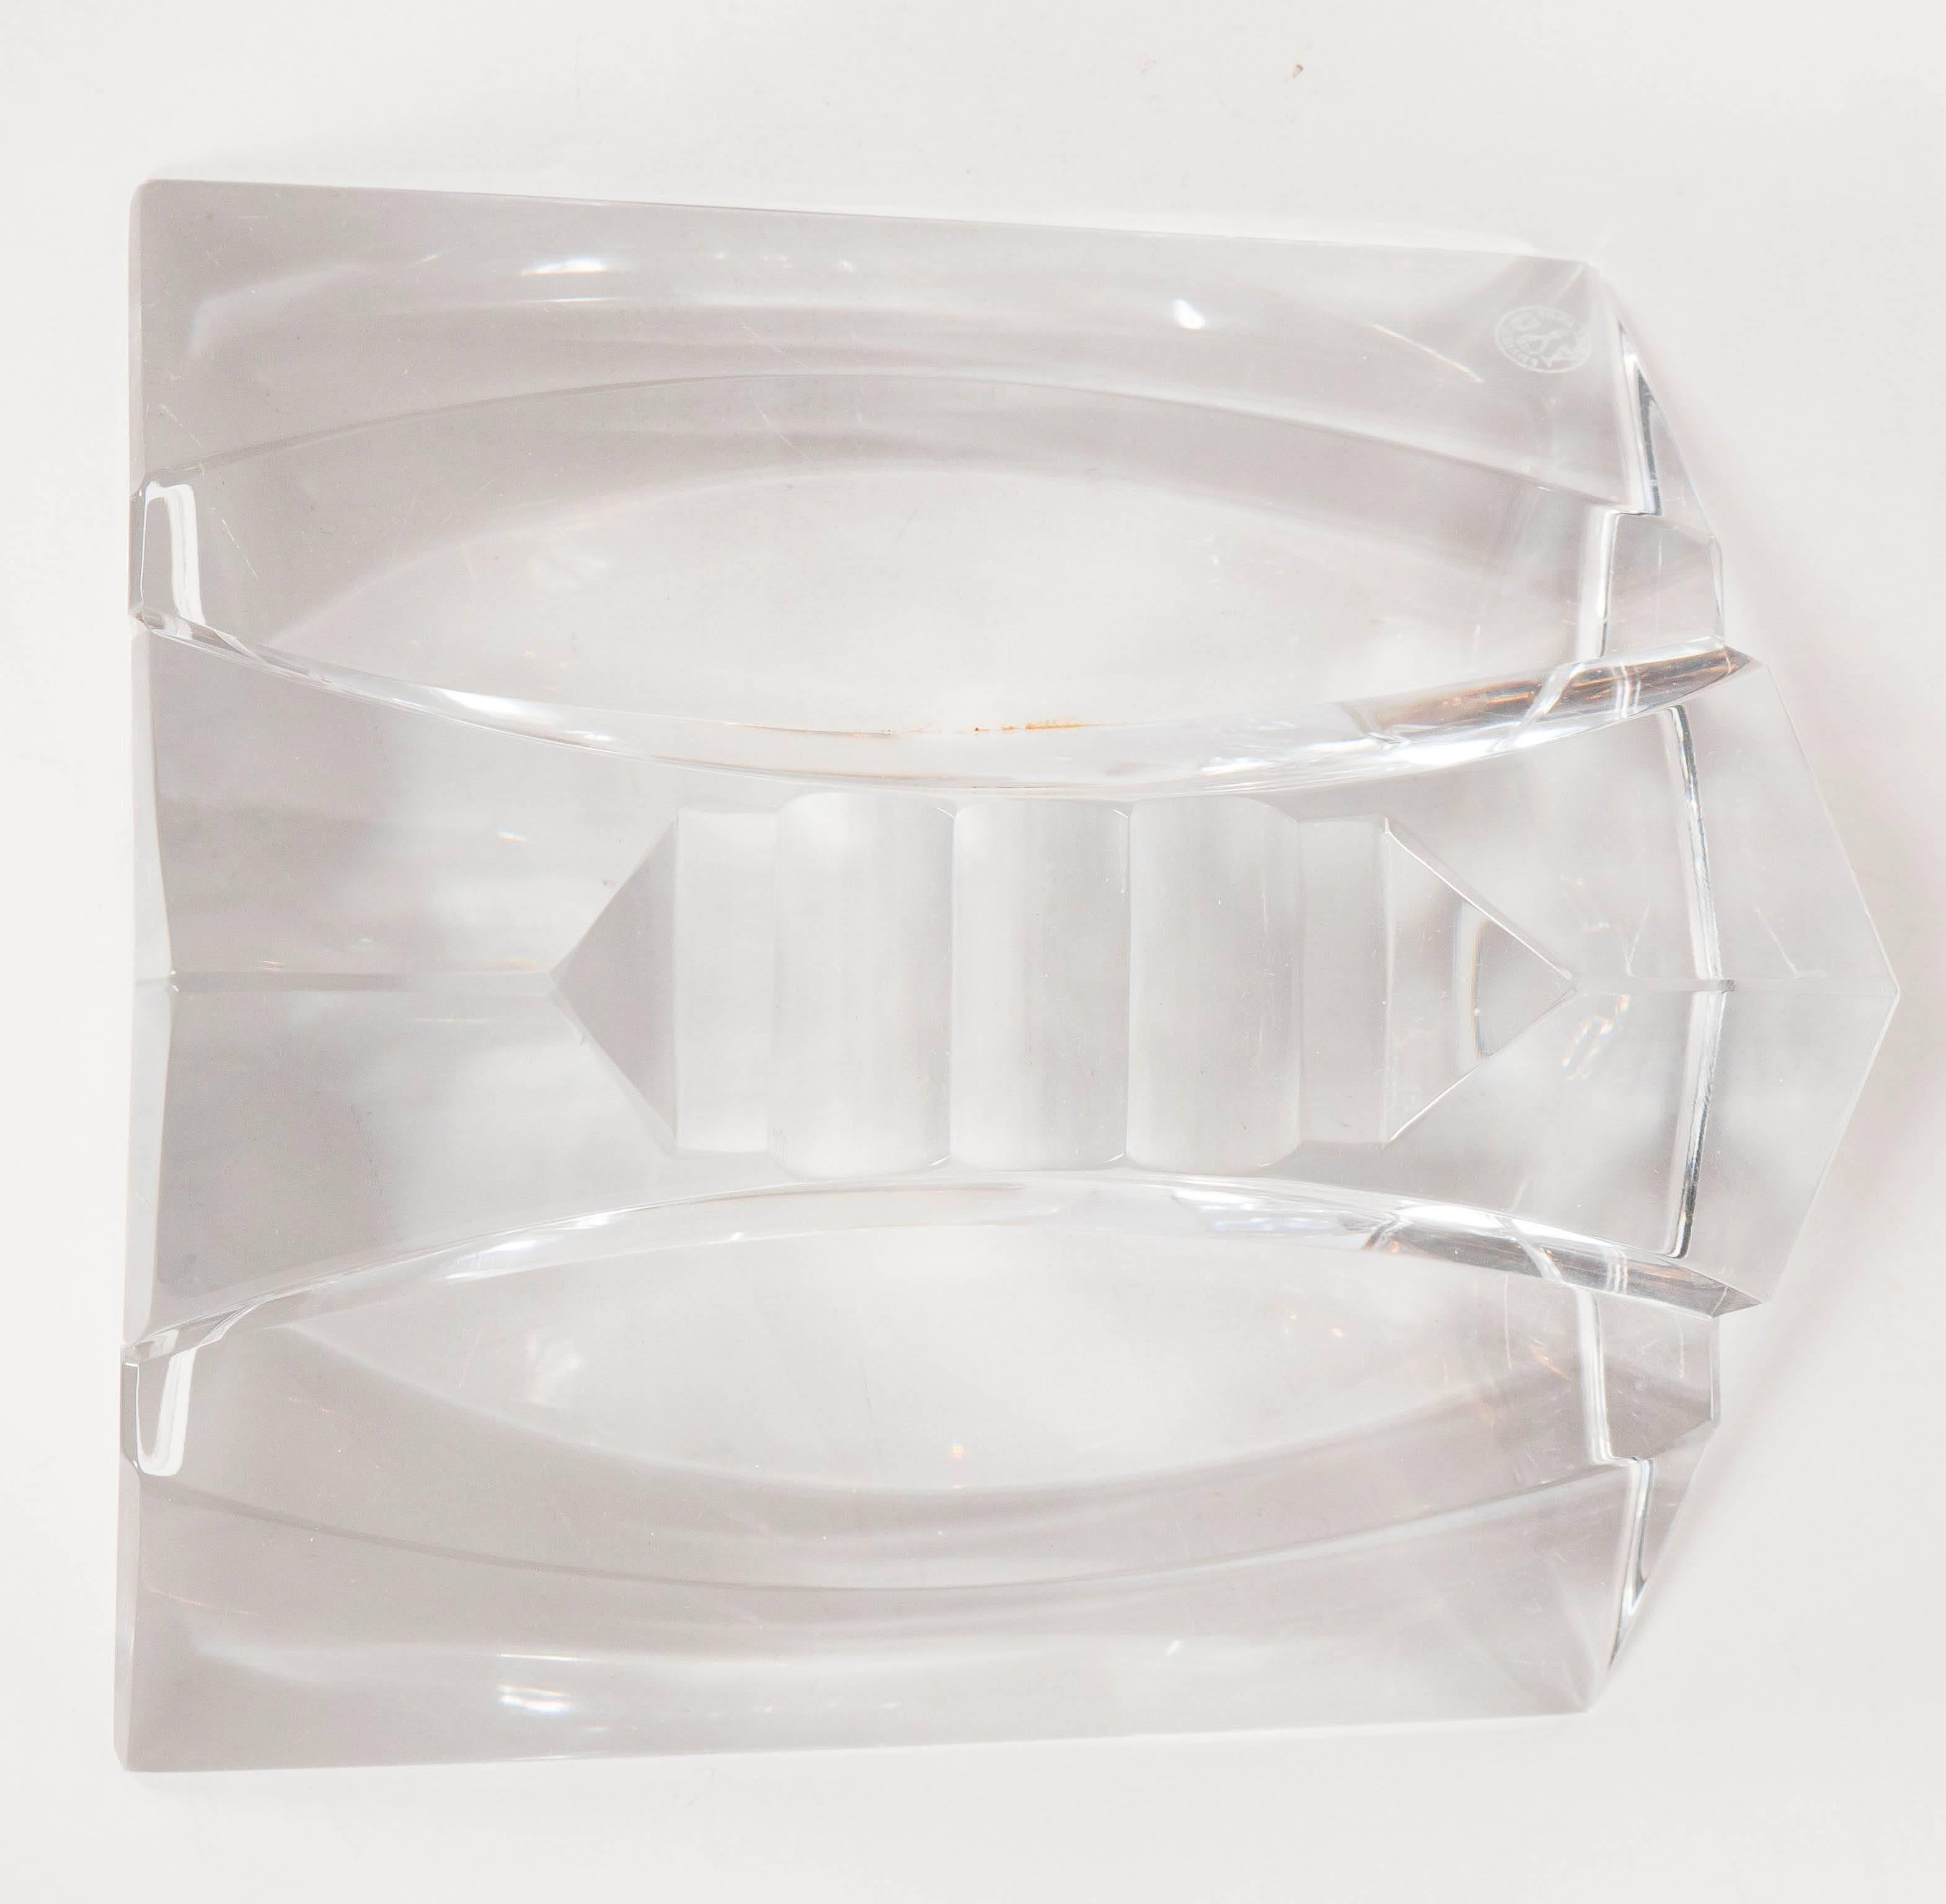 This stunning ashtray /cigar holder features a string geometric triangular form design with cut crystal and beveled detailing. This piece is not only functional but a great sculpture as well. It bears the Baccarat seal and mark on the bottom. It is